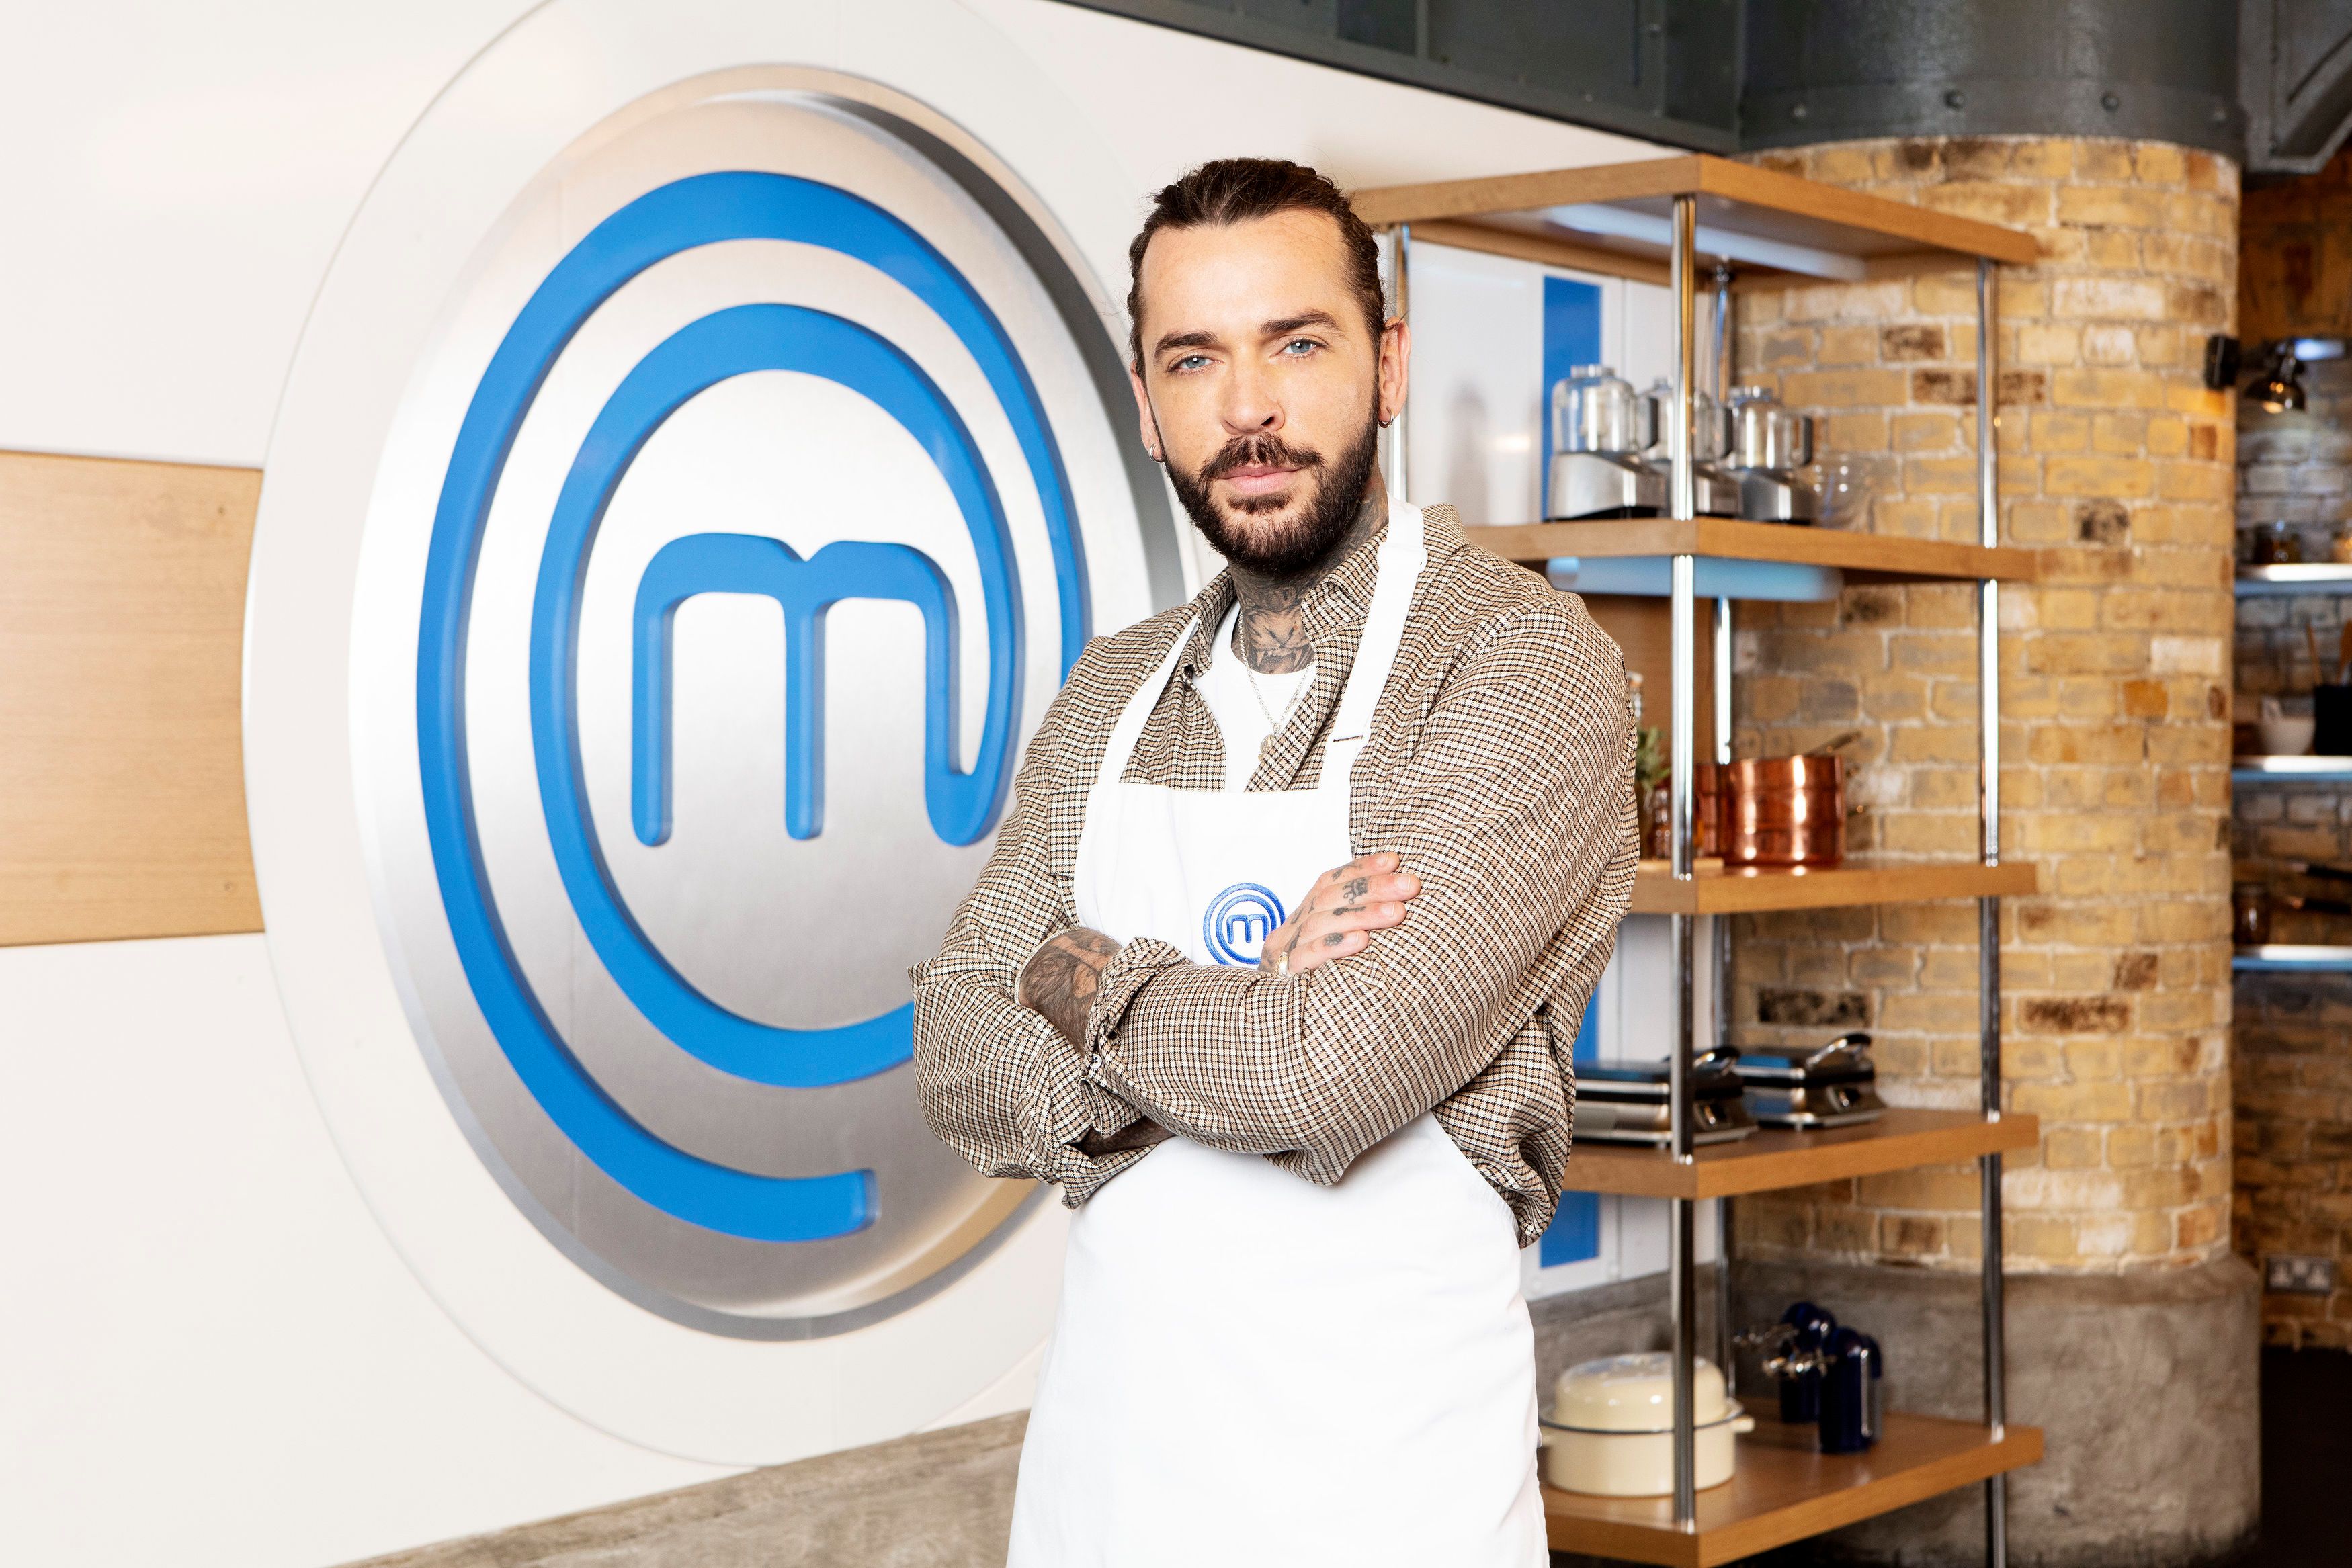 Pete is starring in this years Celebrity MasterChef